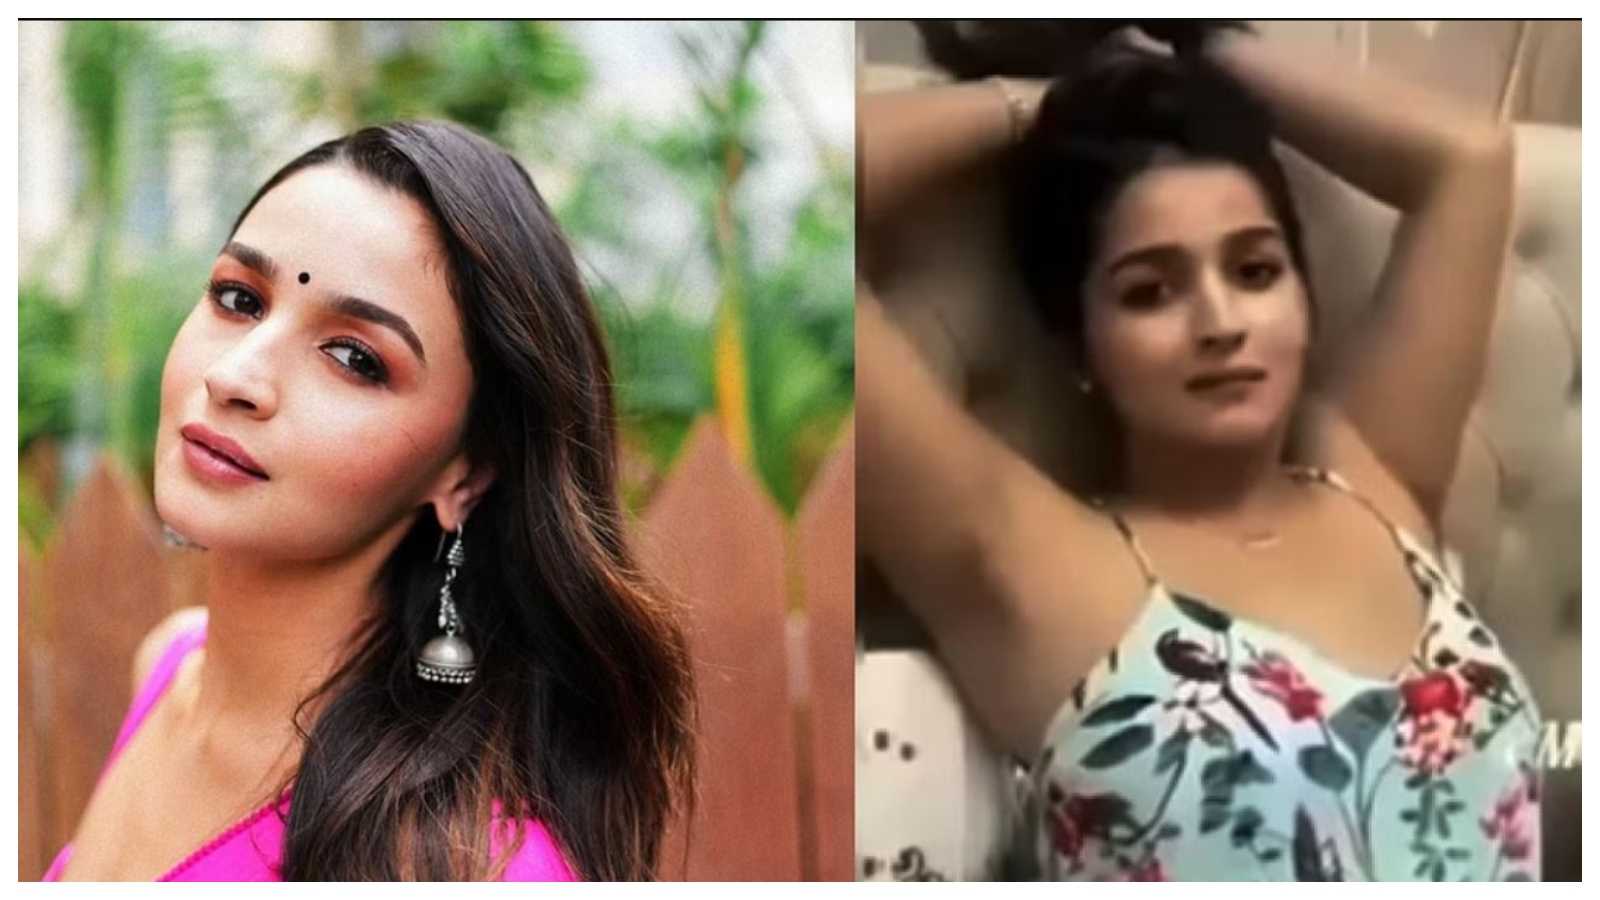 Alia Bhatt becomes new victim of deepfake video, her face morphed into a woman making explicit gestures